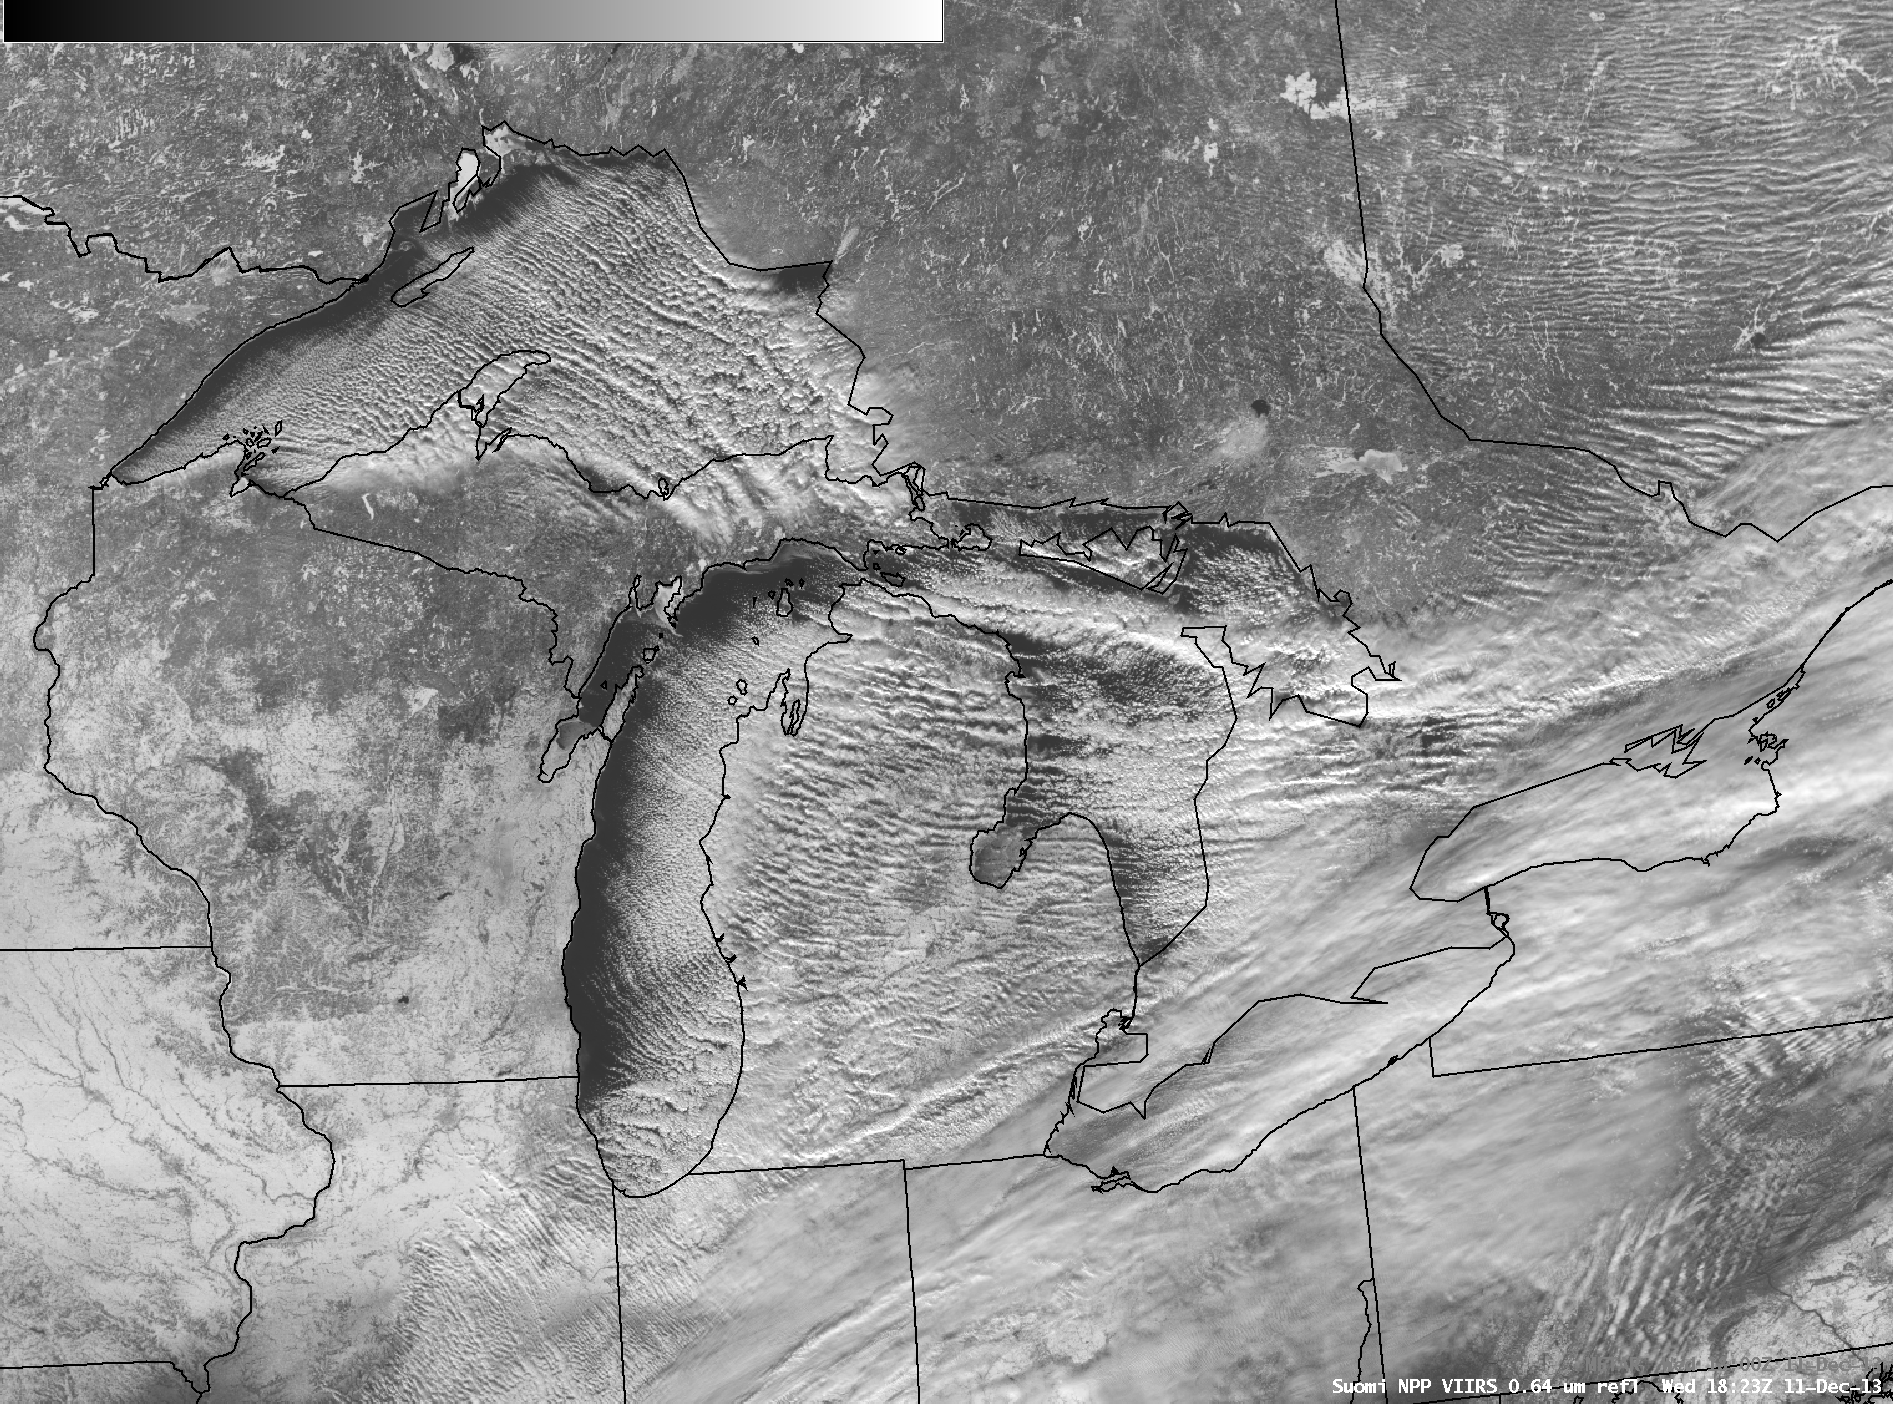 Suomi NPP VIIRS 0.64 Âµm visible channel and false-color RGB images